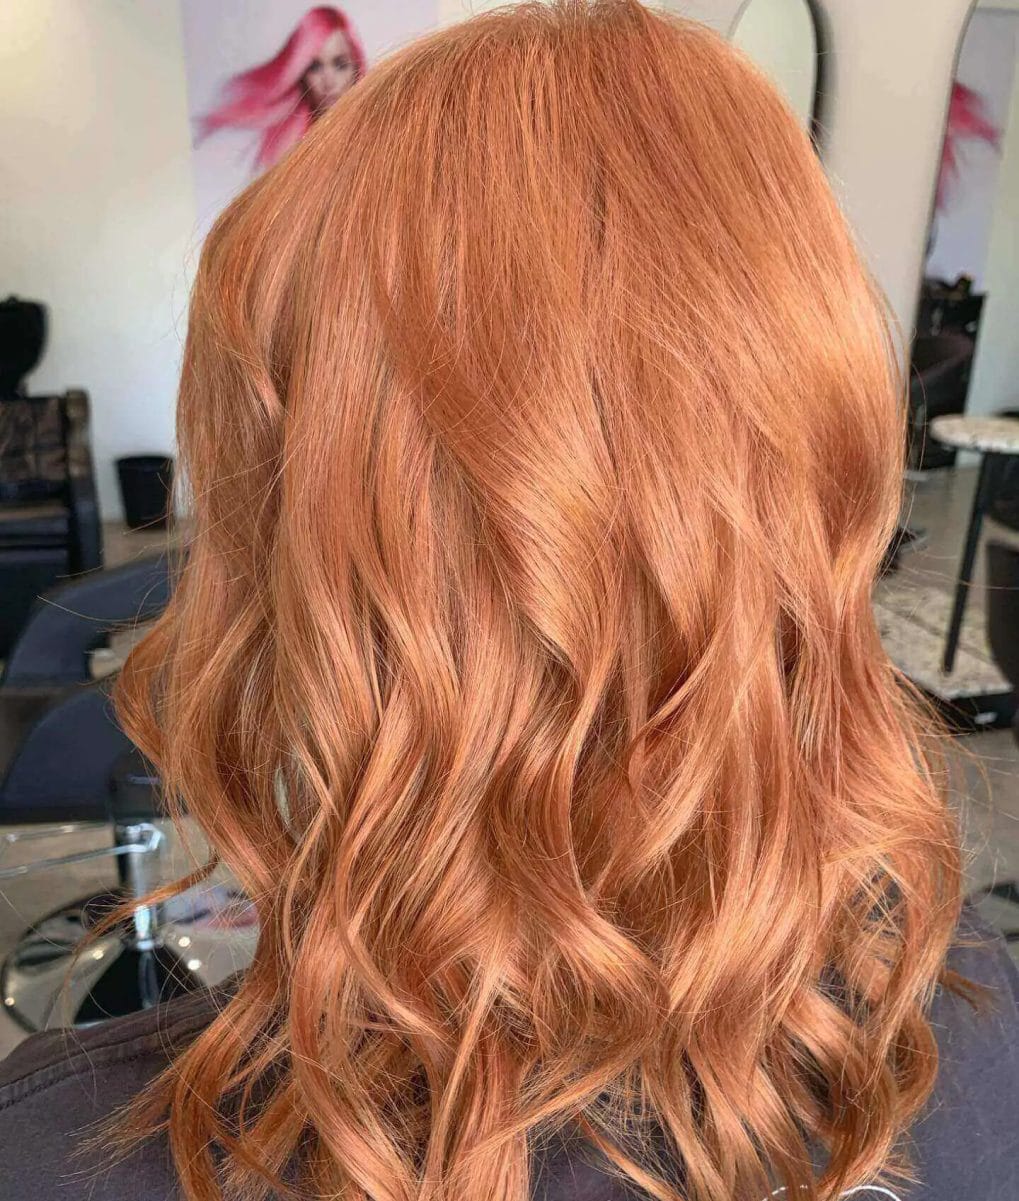 Warm red balayage on a blonde base with vibrant wavy layers.